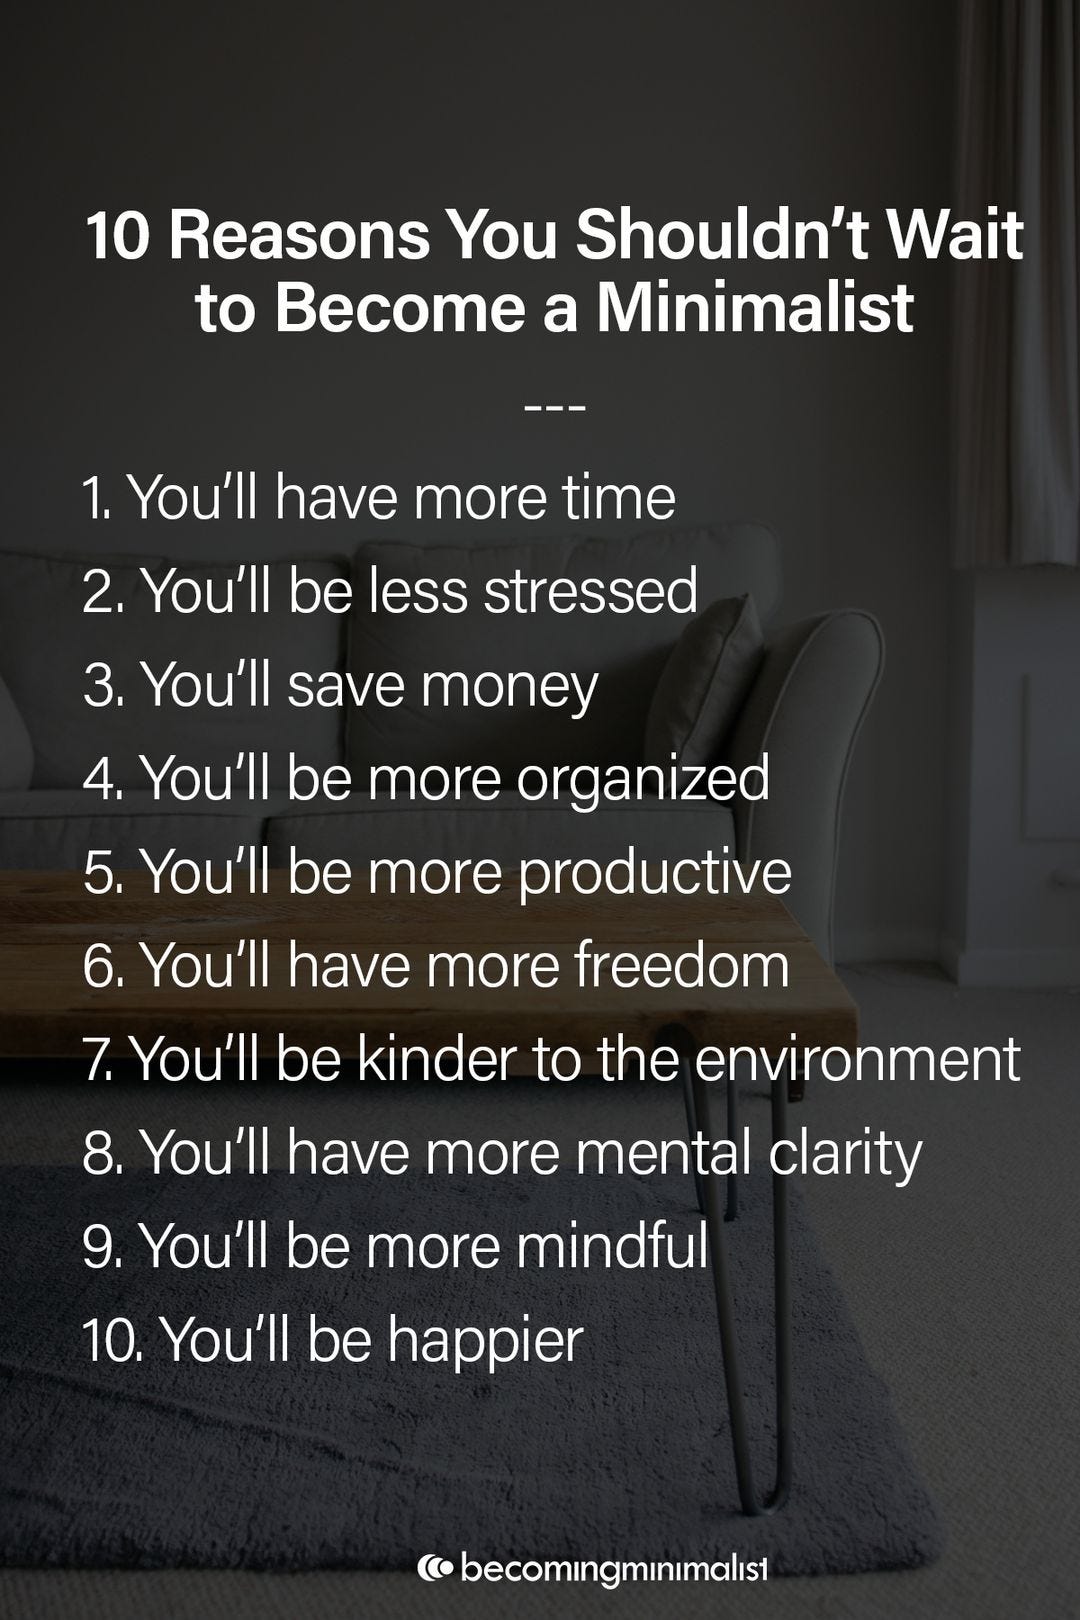 May be a graphic of text that says "10 Reasons You Shouldn't Wait to Become a Minimalist You'll have more time 2. You'll be less stressed 3. You'll save money 4. You'll be more organized 5. You'll be more productive 6. You'll have more freedom 7.You'll be kinder to the environment 8. You'll have more mental clarity 9. You'll be more mindful 10. You'll be happier becomıngmınımalıst"